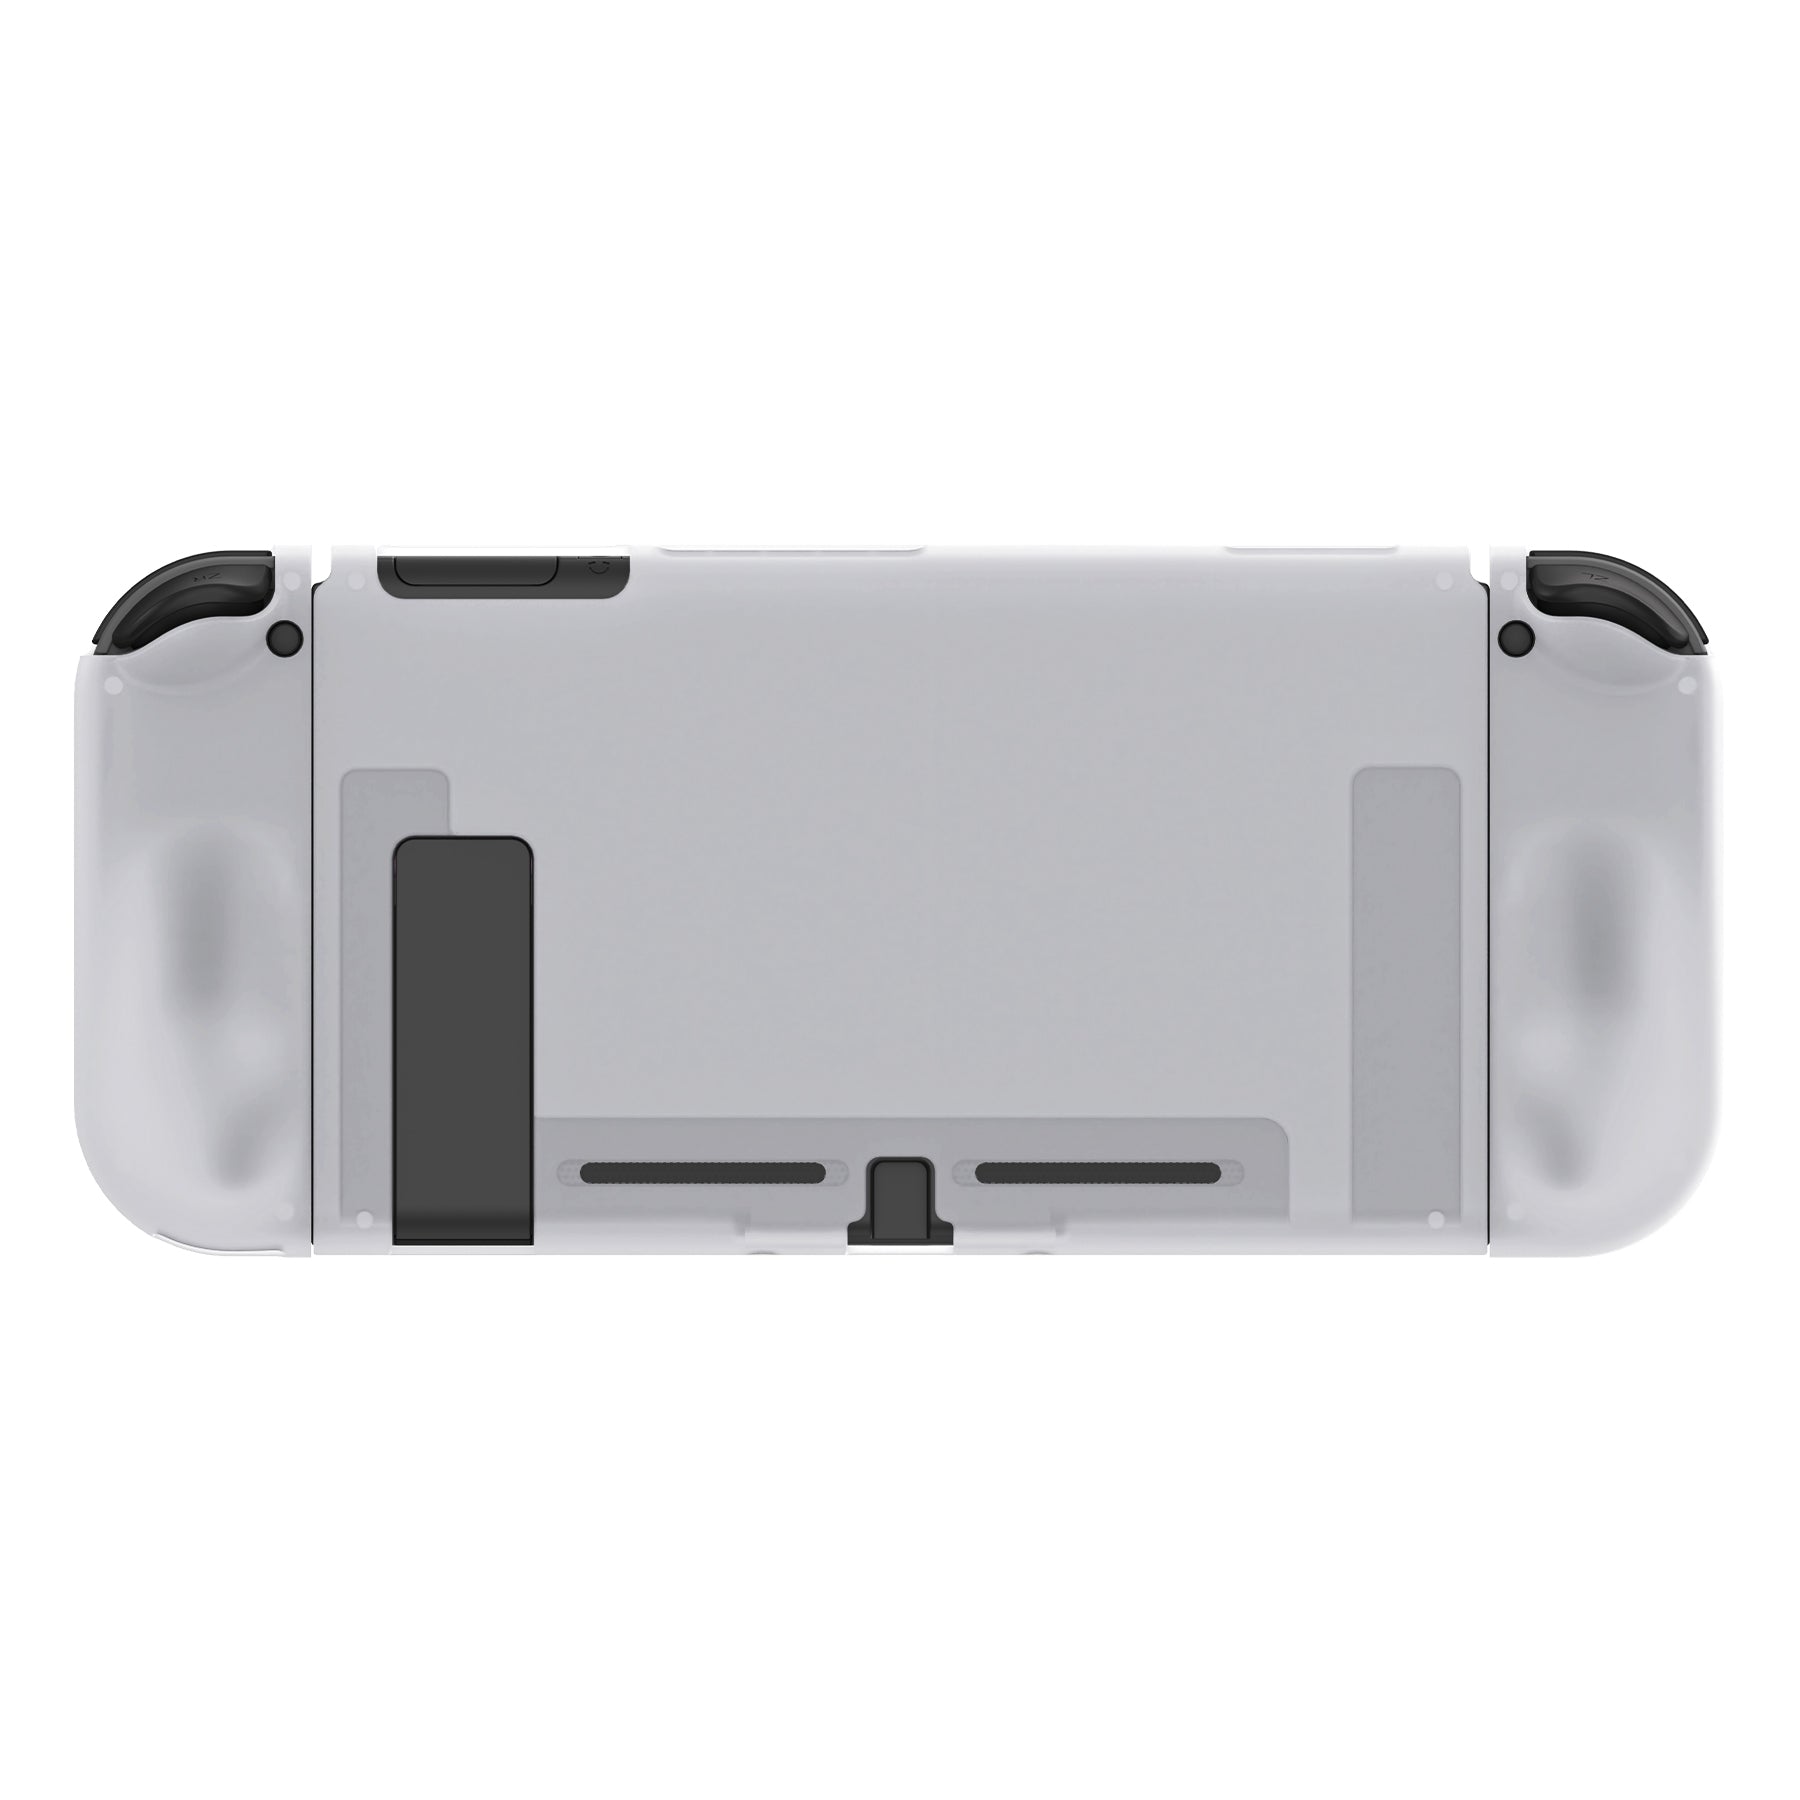 PlayVital Transparent Clear Protective Case for NS Switch, Soft TPU Slim Case Cover for NS Switch Joy-Con Console with Colorful ABXY Direction Button Caps - NTU6008 PlayVital